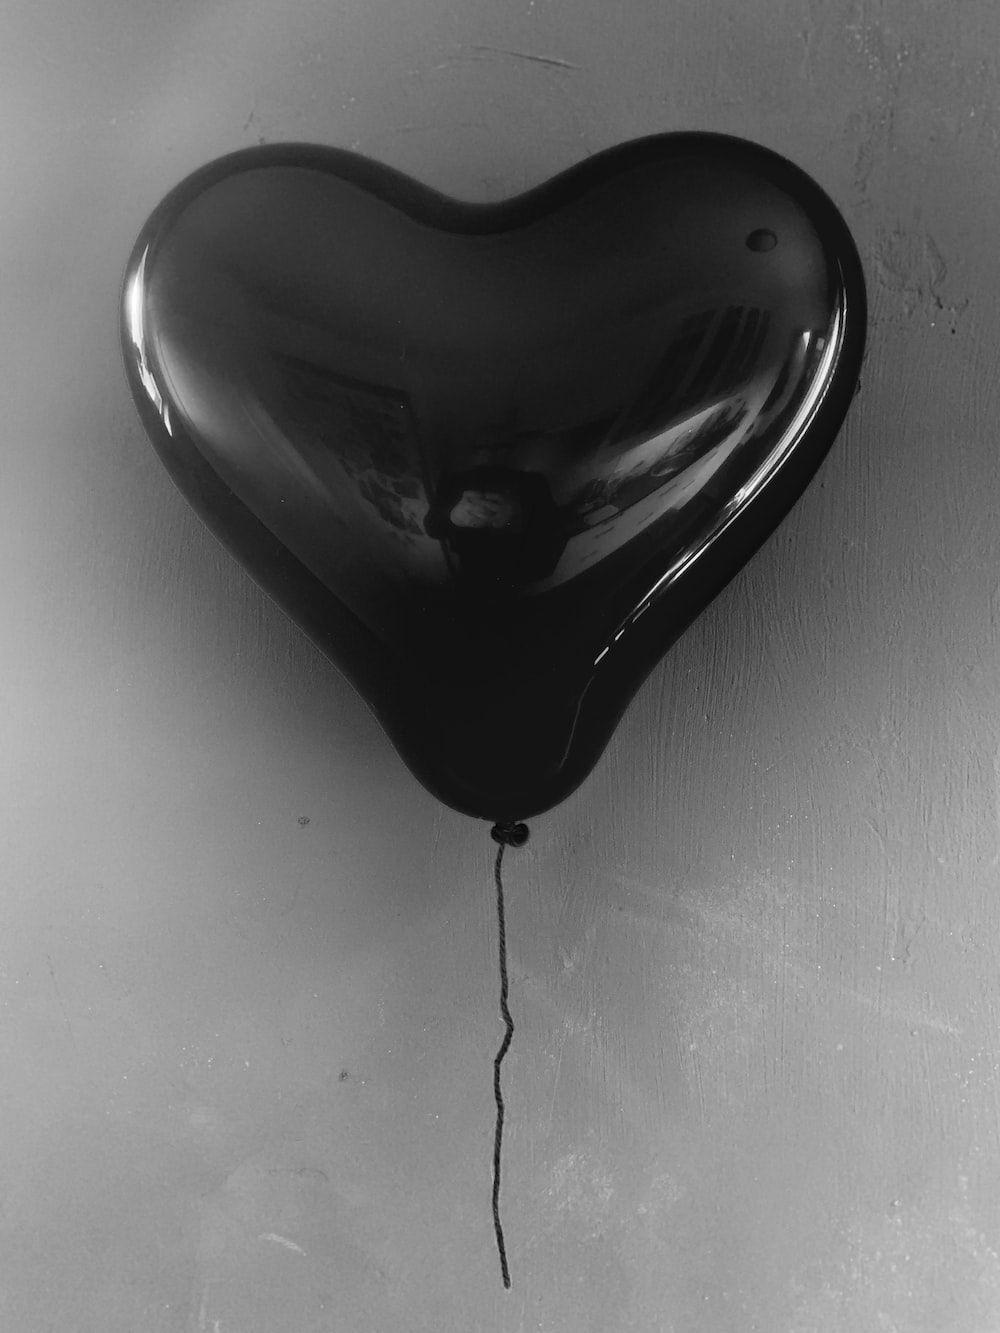 A black heart balloon is tied to a string and is about to pop. - Black heart